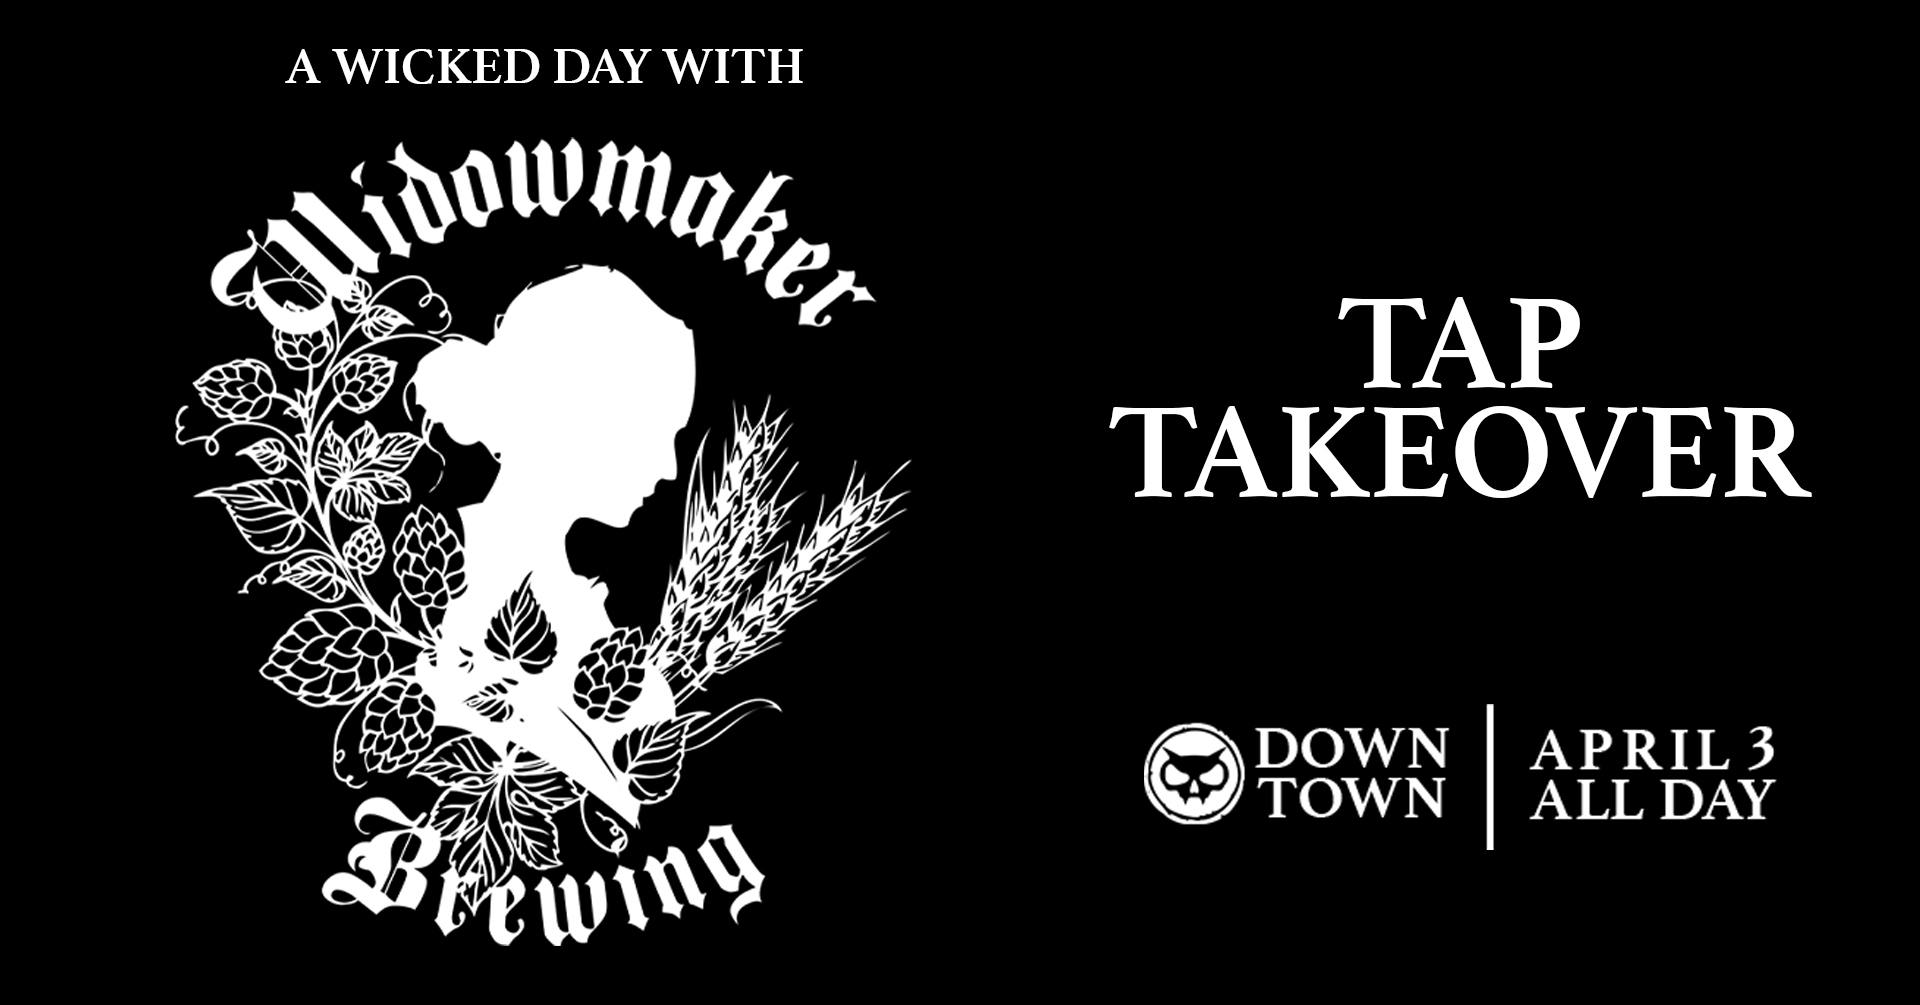 Widowmaker Brewing tap takeover. April 3rd all day at the downtown location.